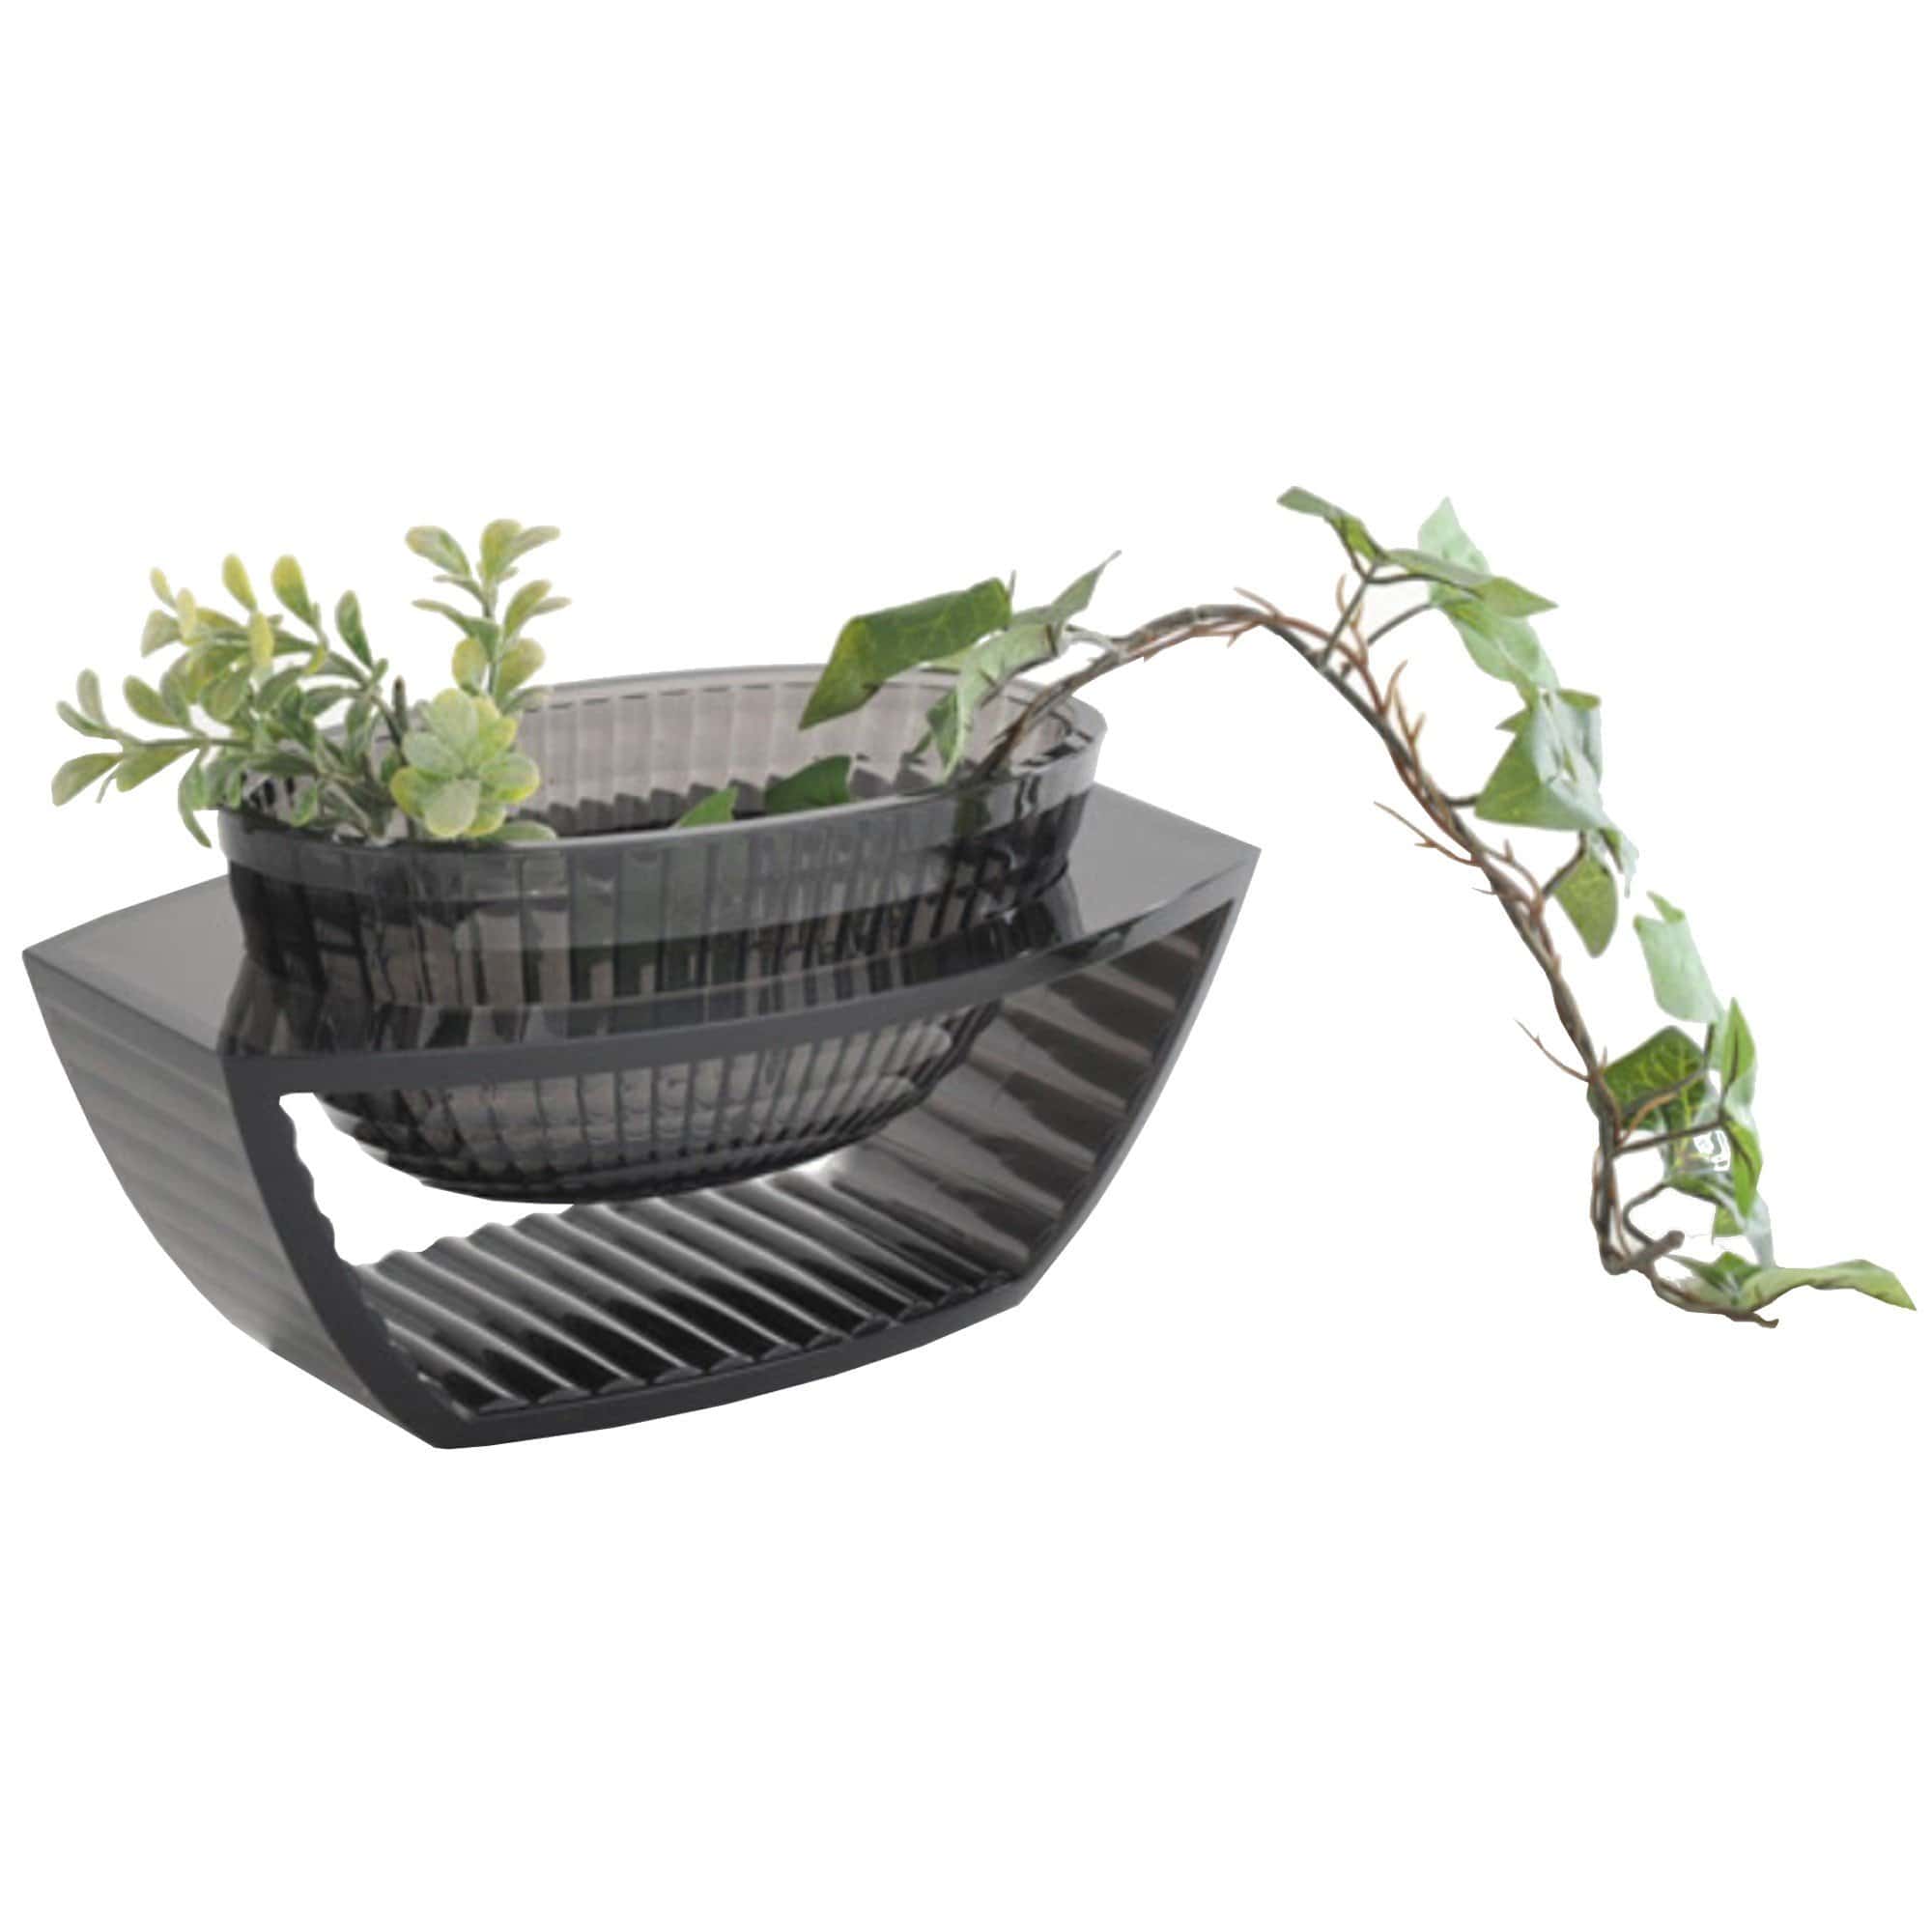 A smoke grey coloured centrepiece with a plant inside it.